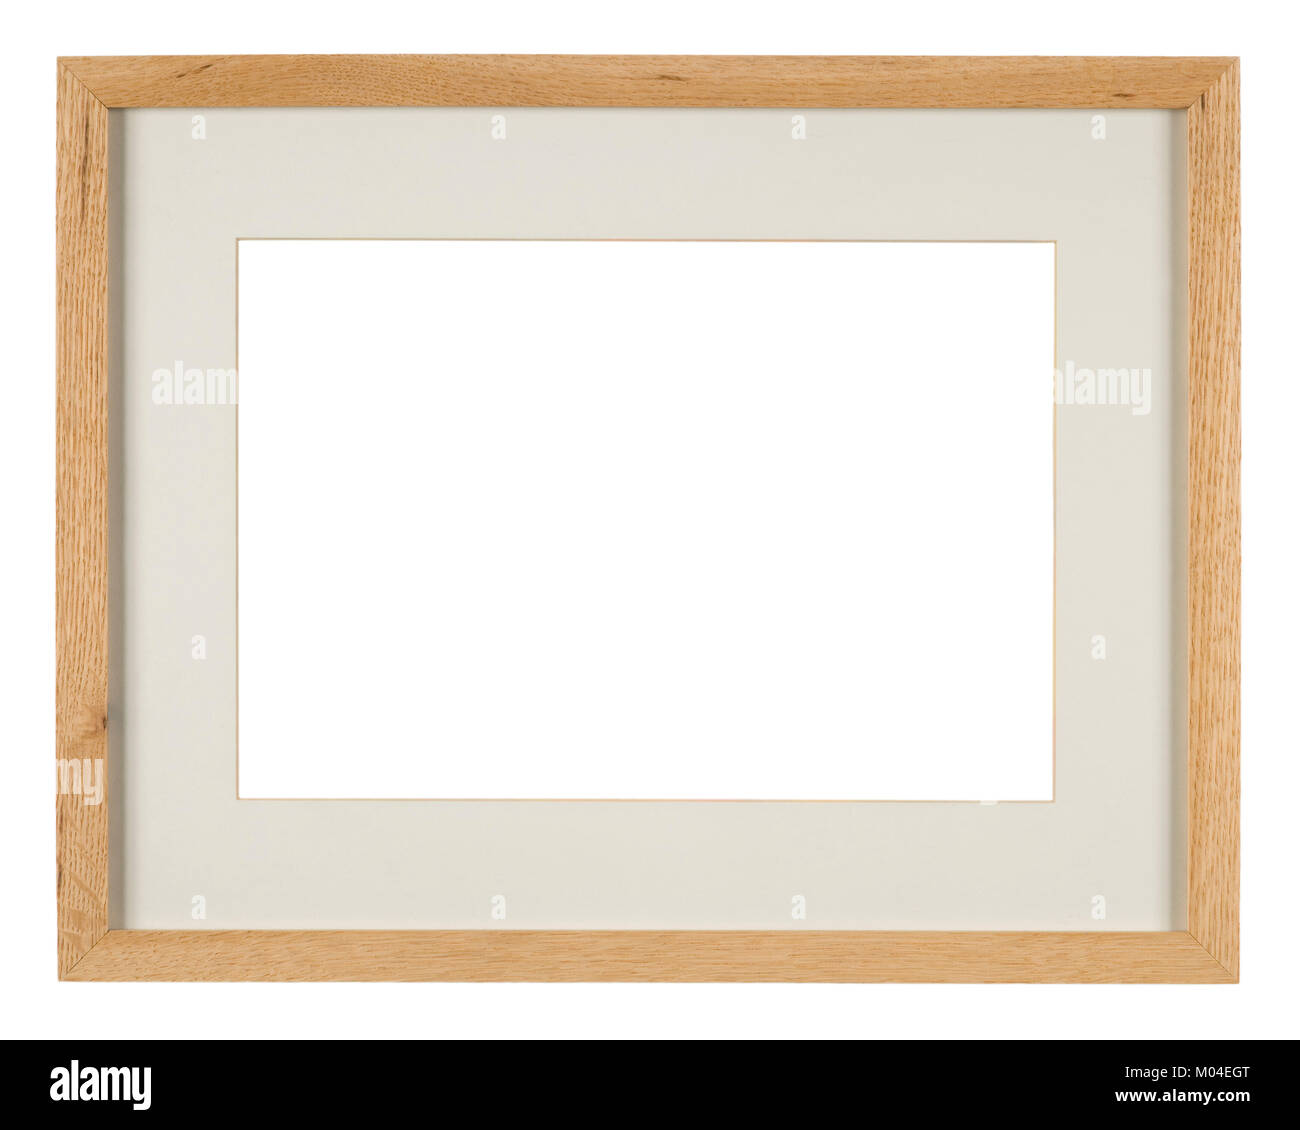 Empty picture frame, light oak wood with mount Stock Photo